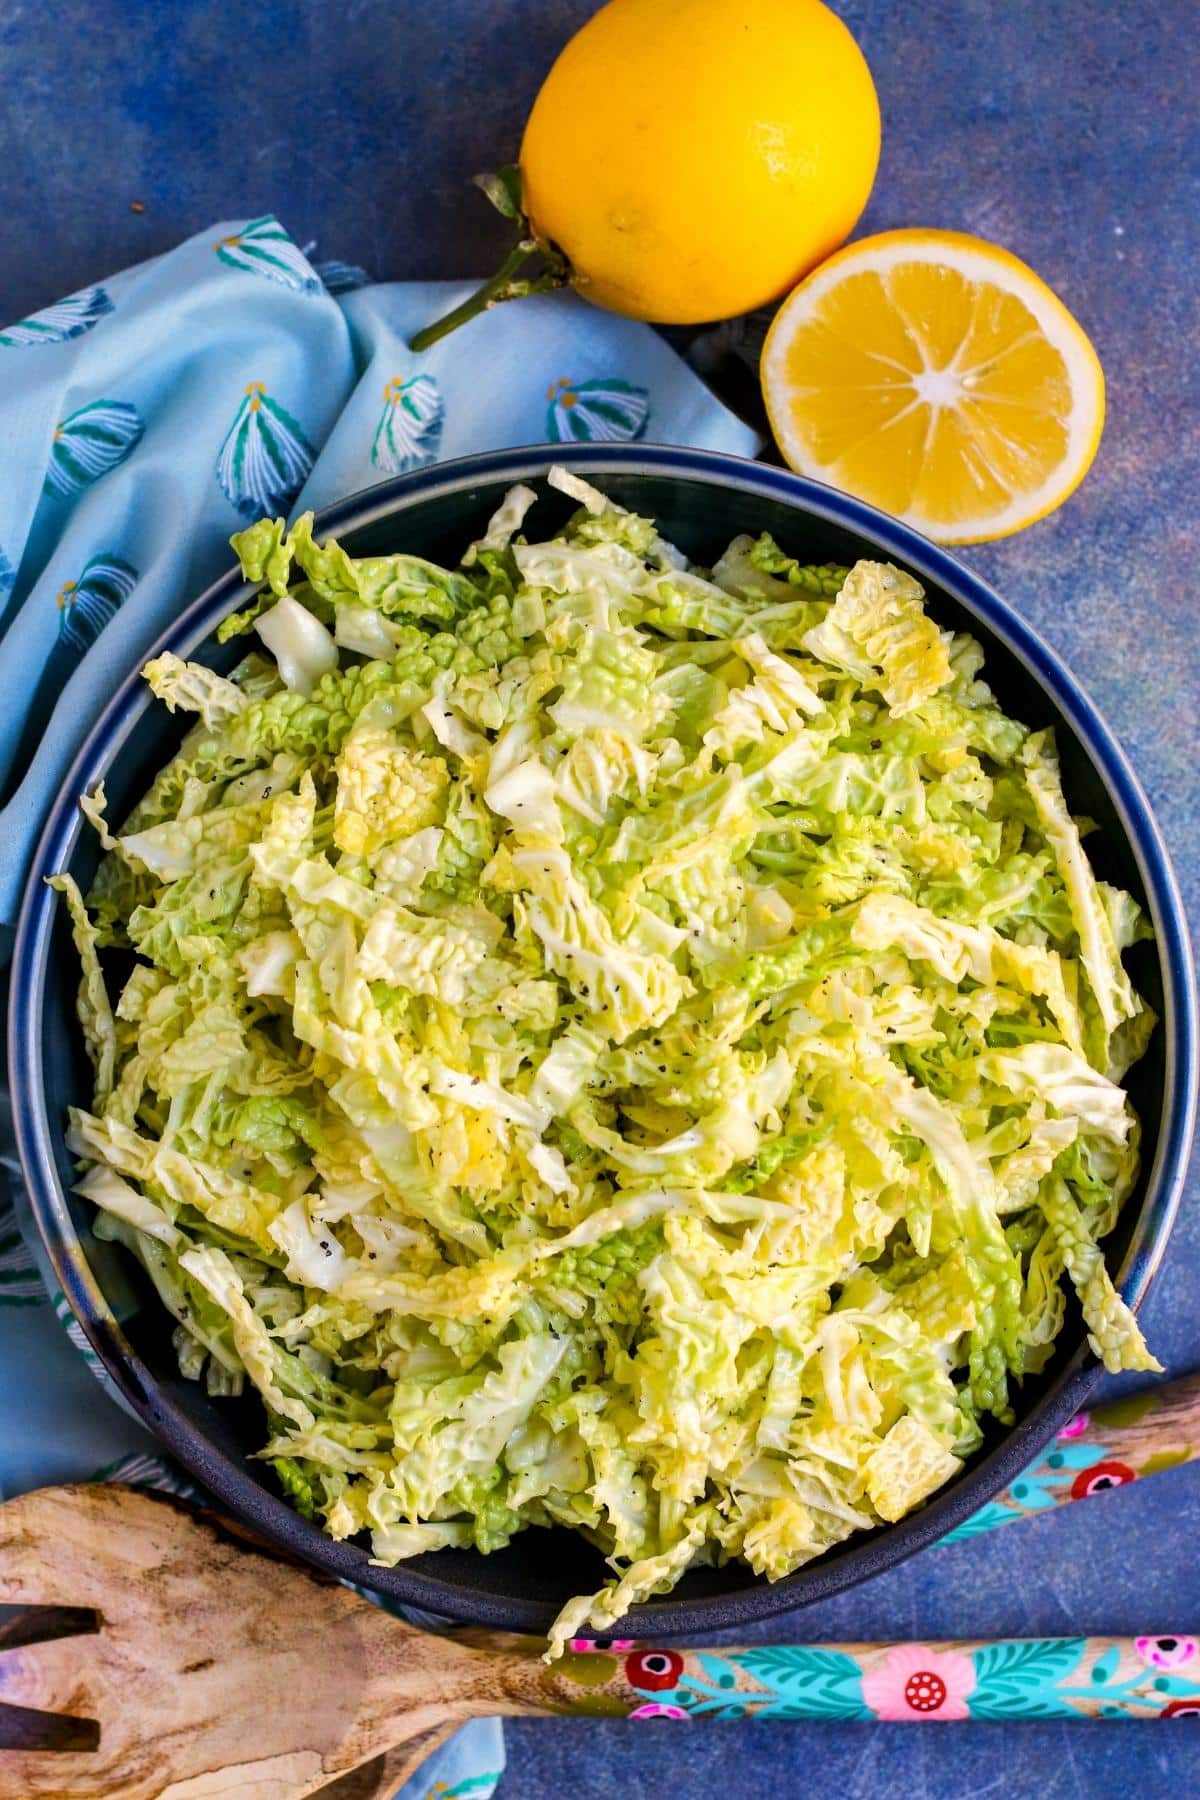 Slaw in a serving bowl with cut lemon and serving spoons next to it.